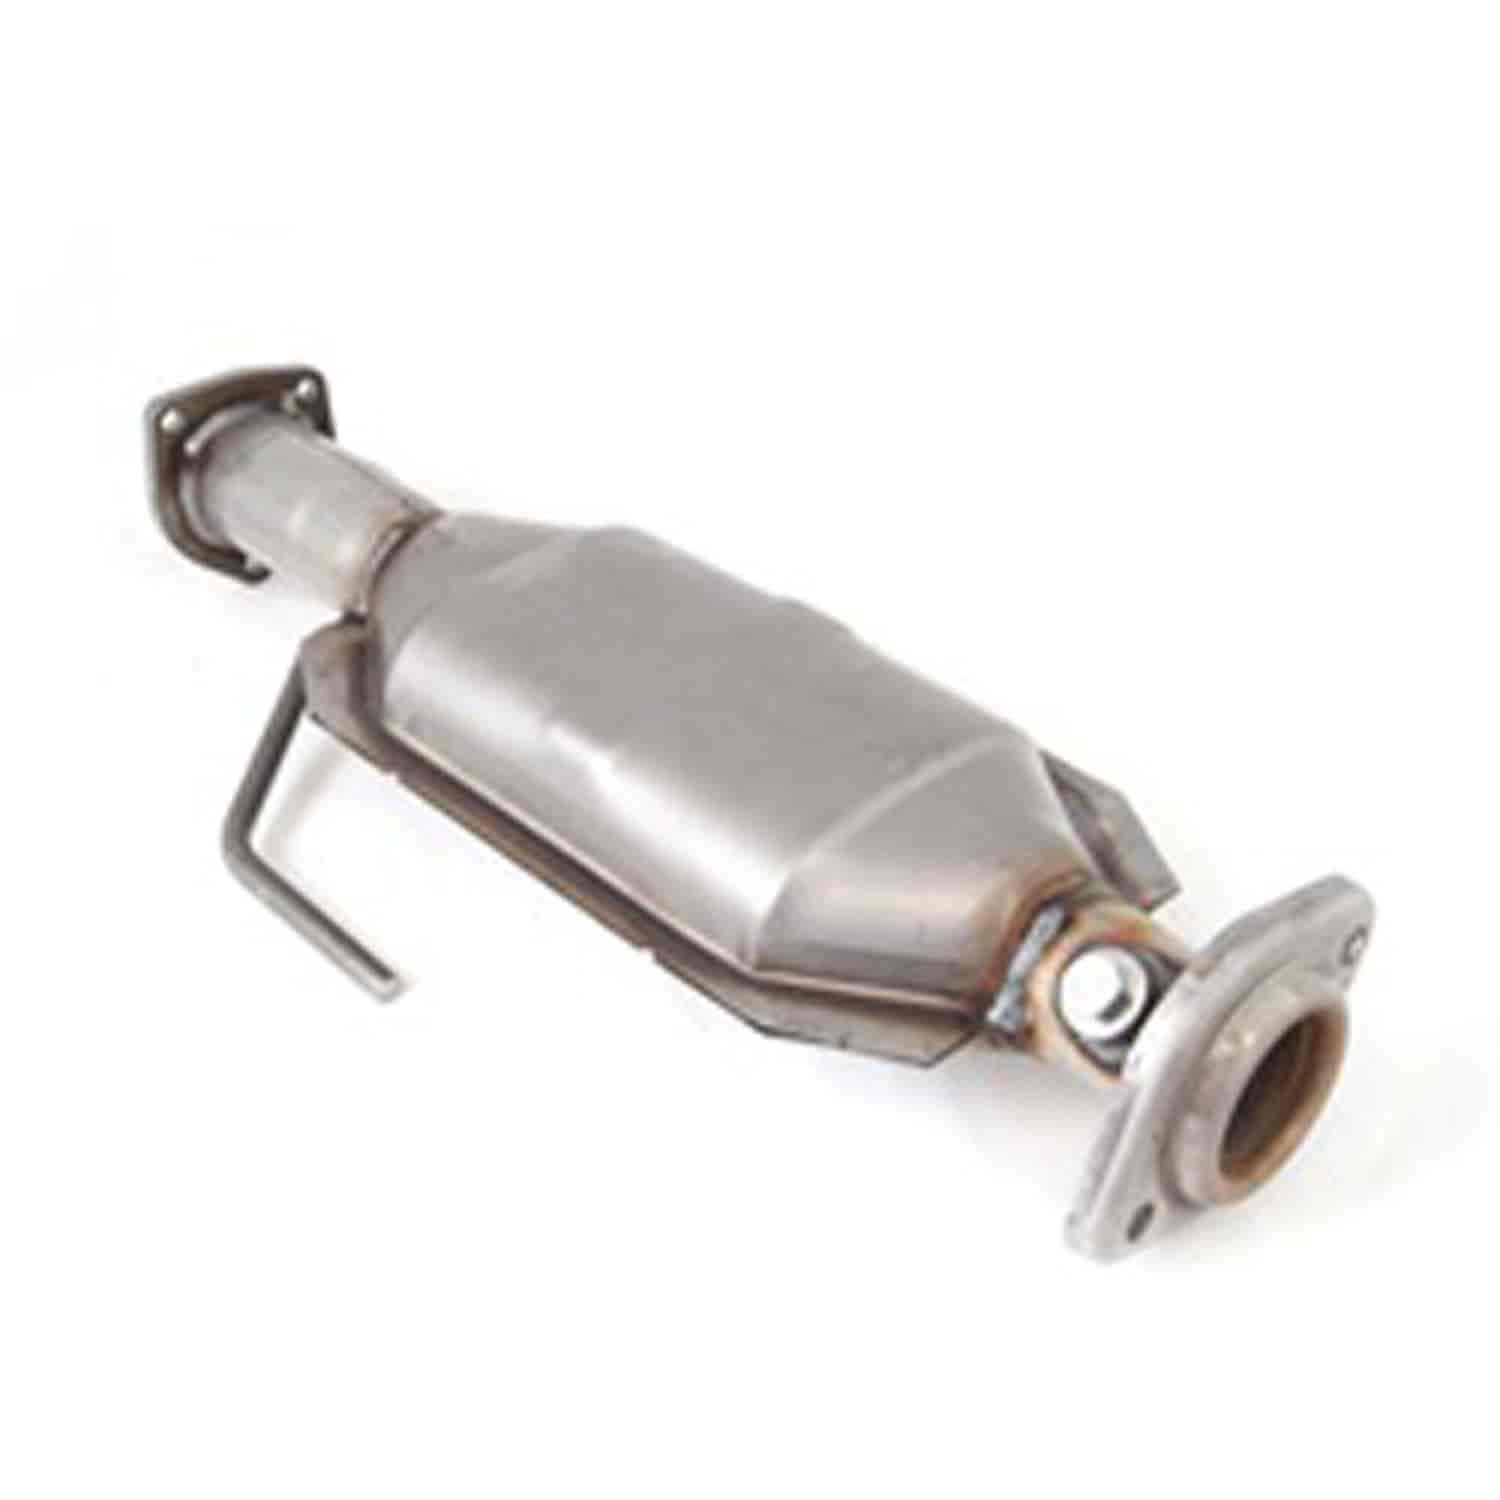 Replacement catalytic converter from Omix-ADA, Fits 00-02 Jeep Wrangler with a 4.0 liter engine.